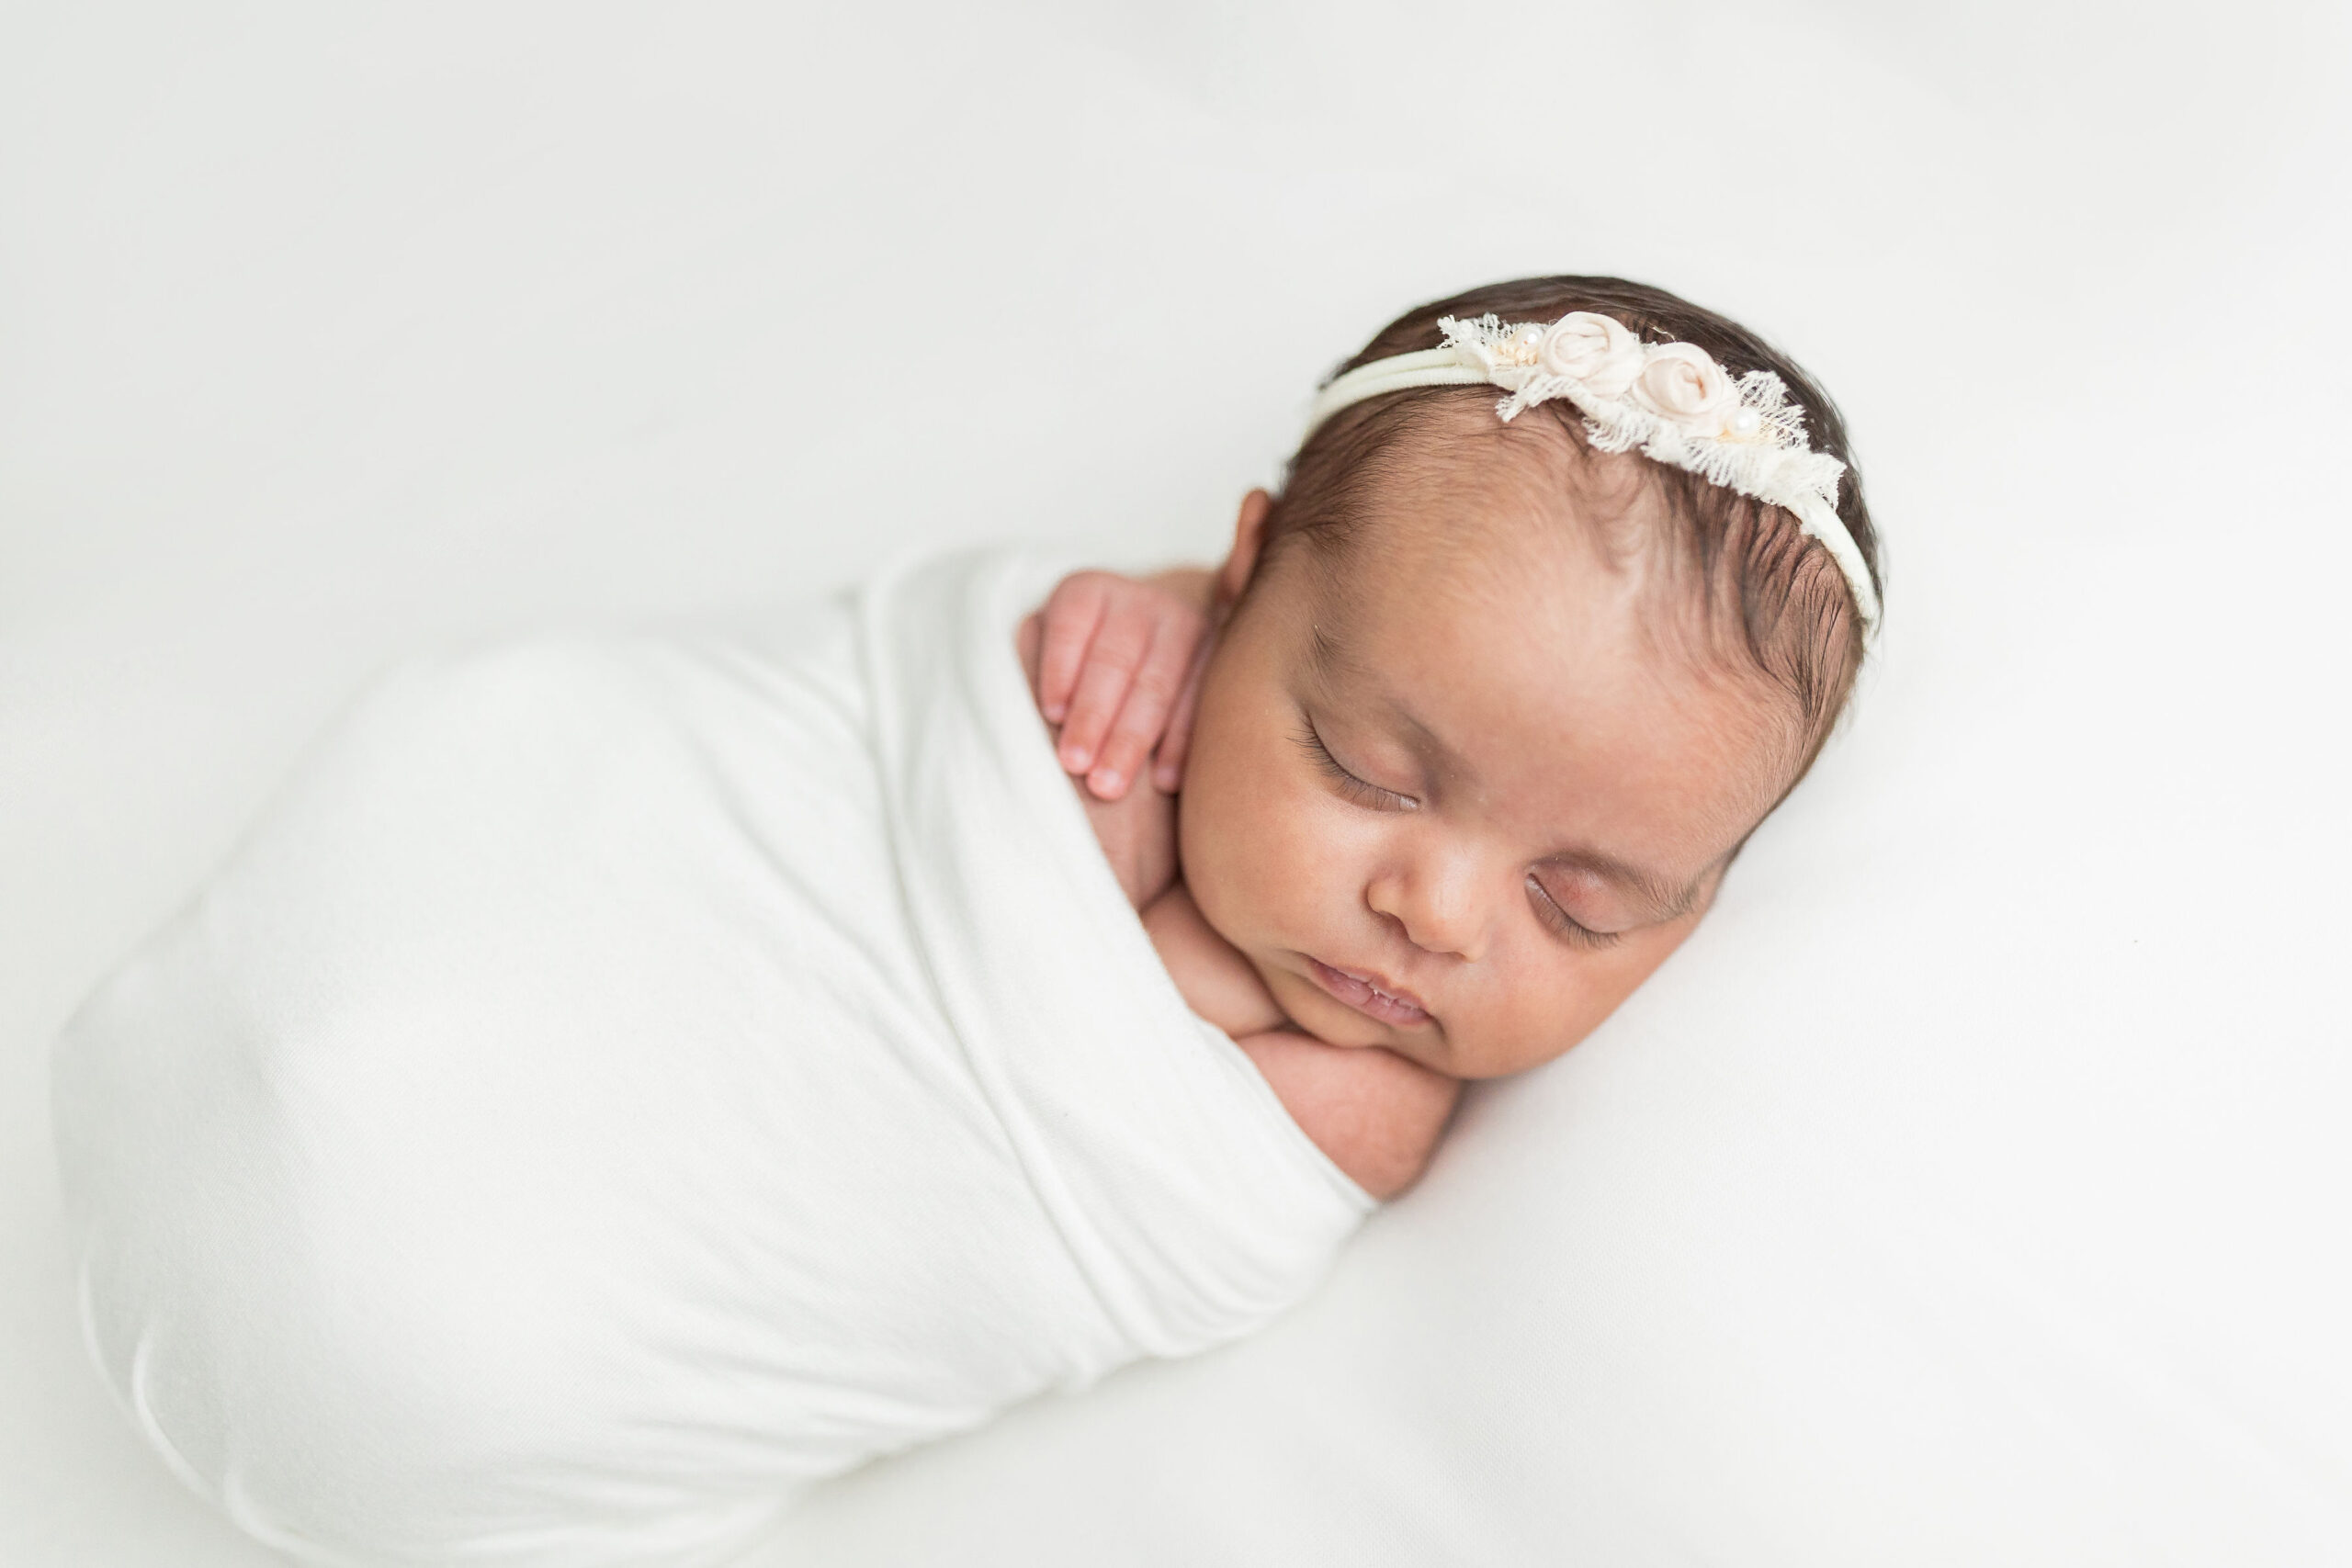 A newborn baby girl sleeps on a white bed in a swaddle in a studio namely newborns